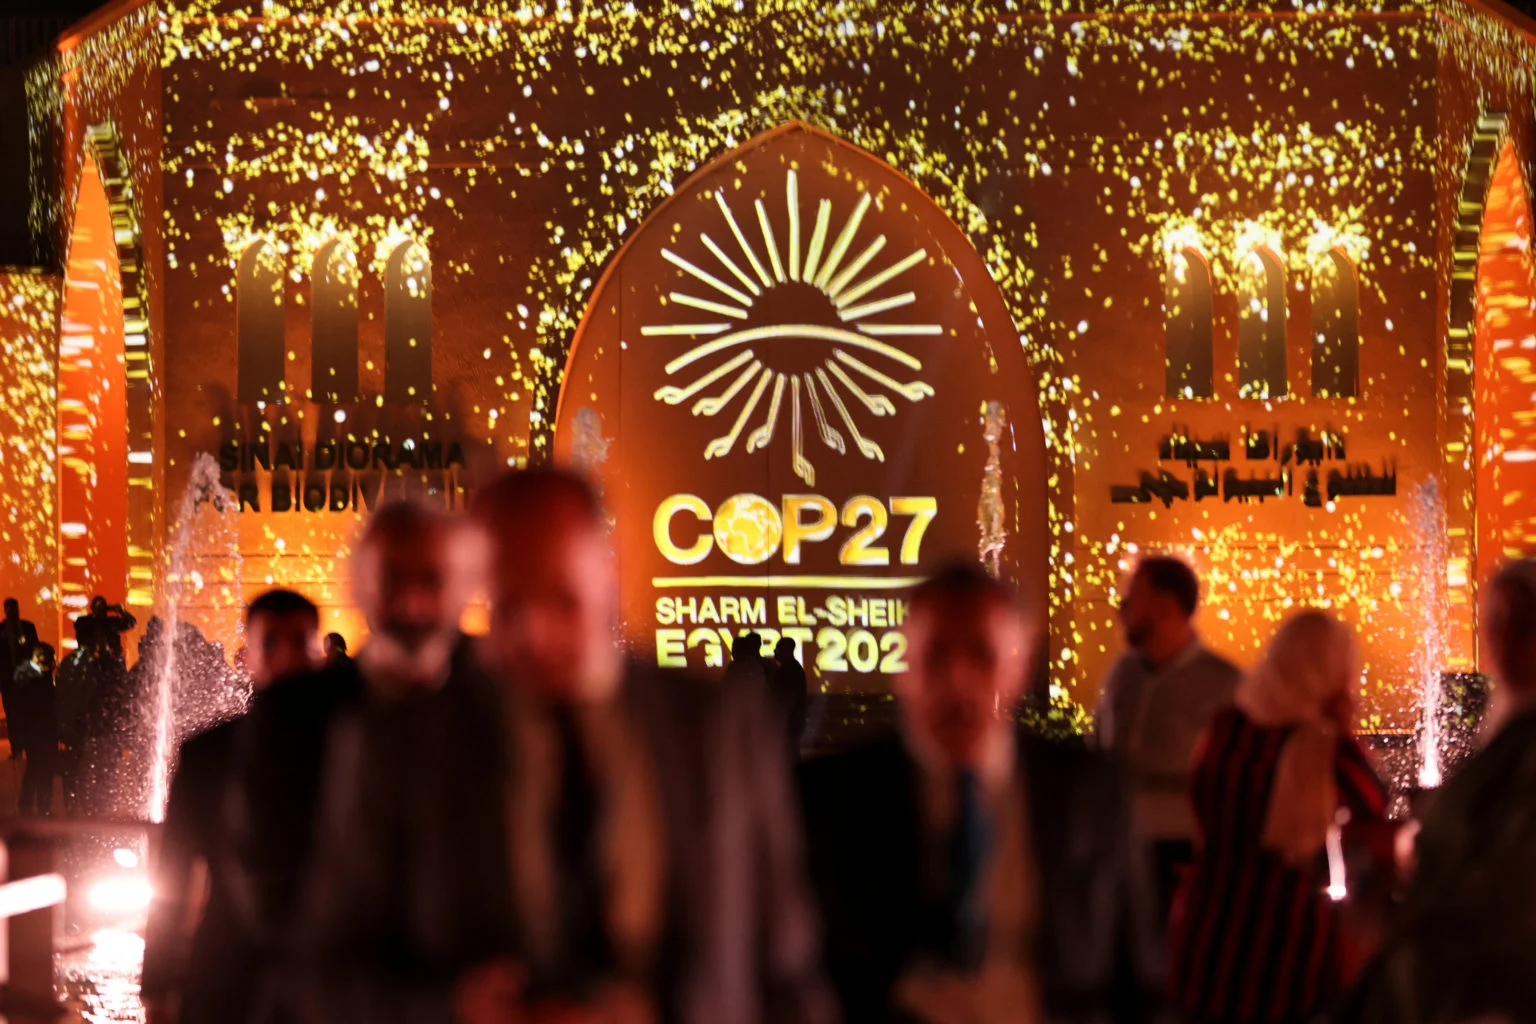 People pass in front of a wall lit with the sign of COP27 as the COP27 climate summit takes place, at the Green Zone in Sharm el-Sheikh, Egypt, 10 November 2022. Photo: REUTERS